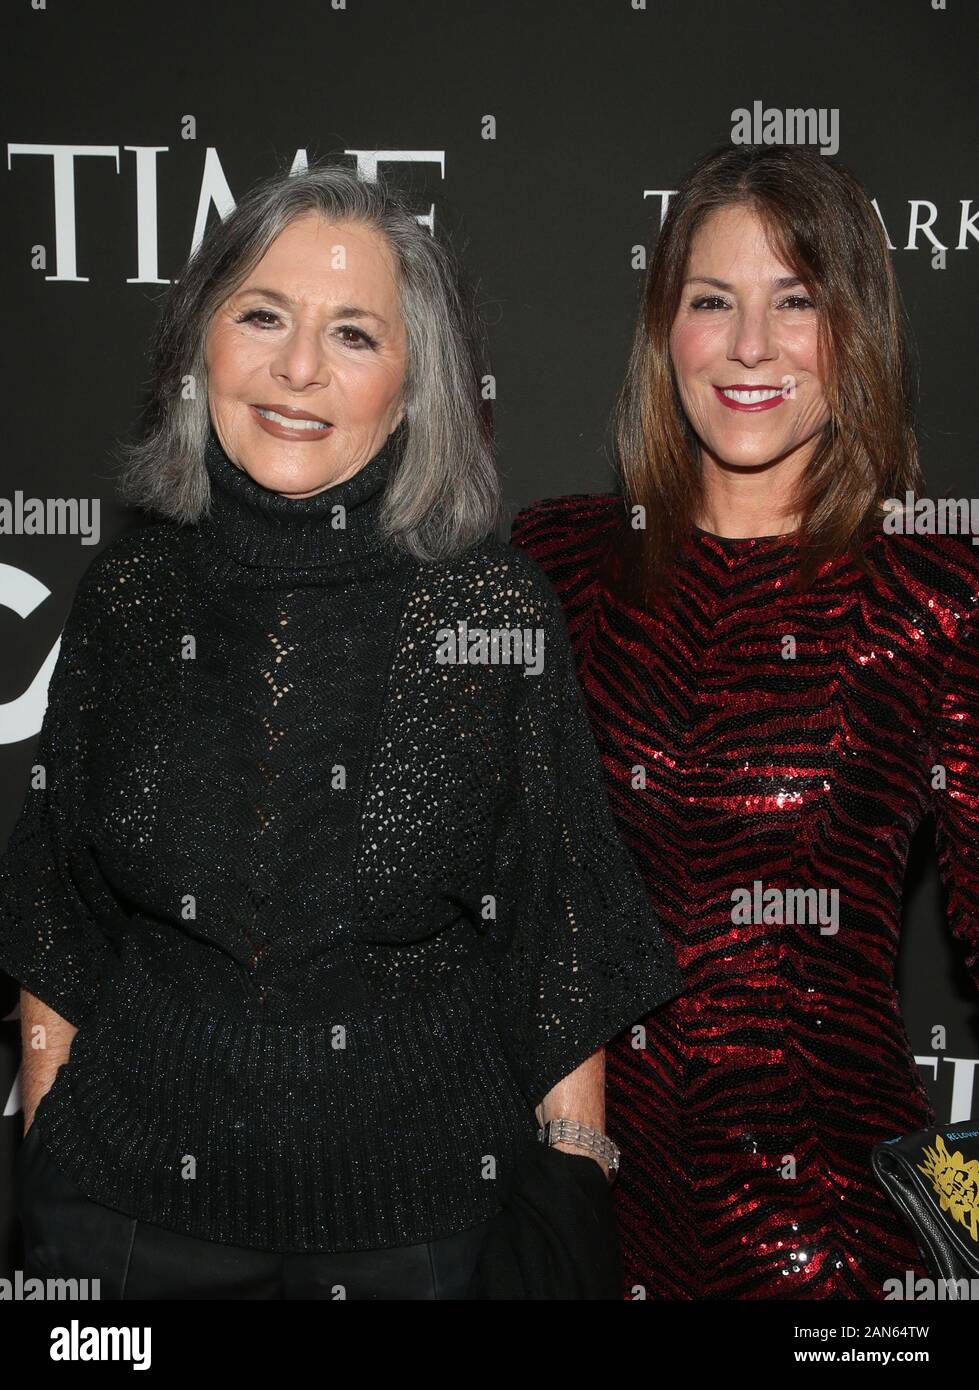 Los Angeles, Ca. 15th Jan, 2020. Barbara Boxer, Nicole Boxer, at 10th Anniversary Gala Benefiting CORE at The Wiltern Theatre in Los Angeles, California on January 15, 2020. Credit: Faye Sadou/Media Punch/Alamy Live News Stock Photo